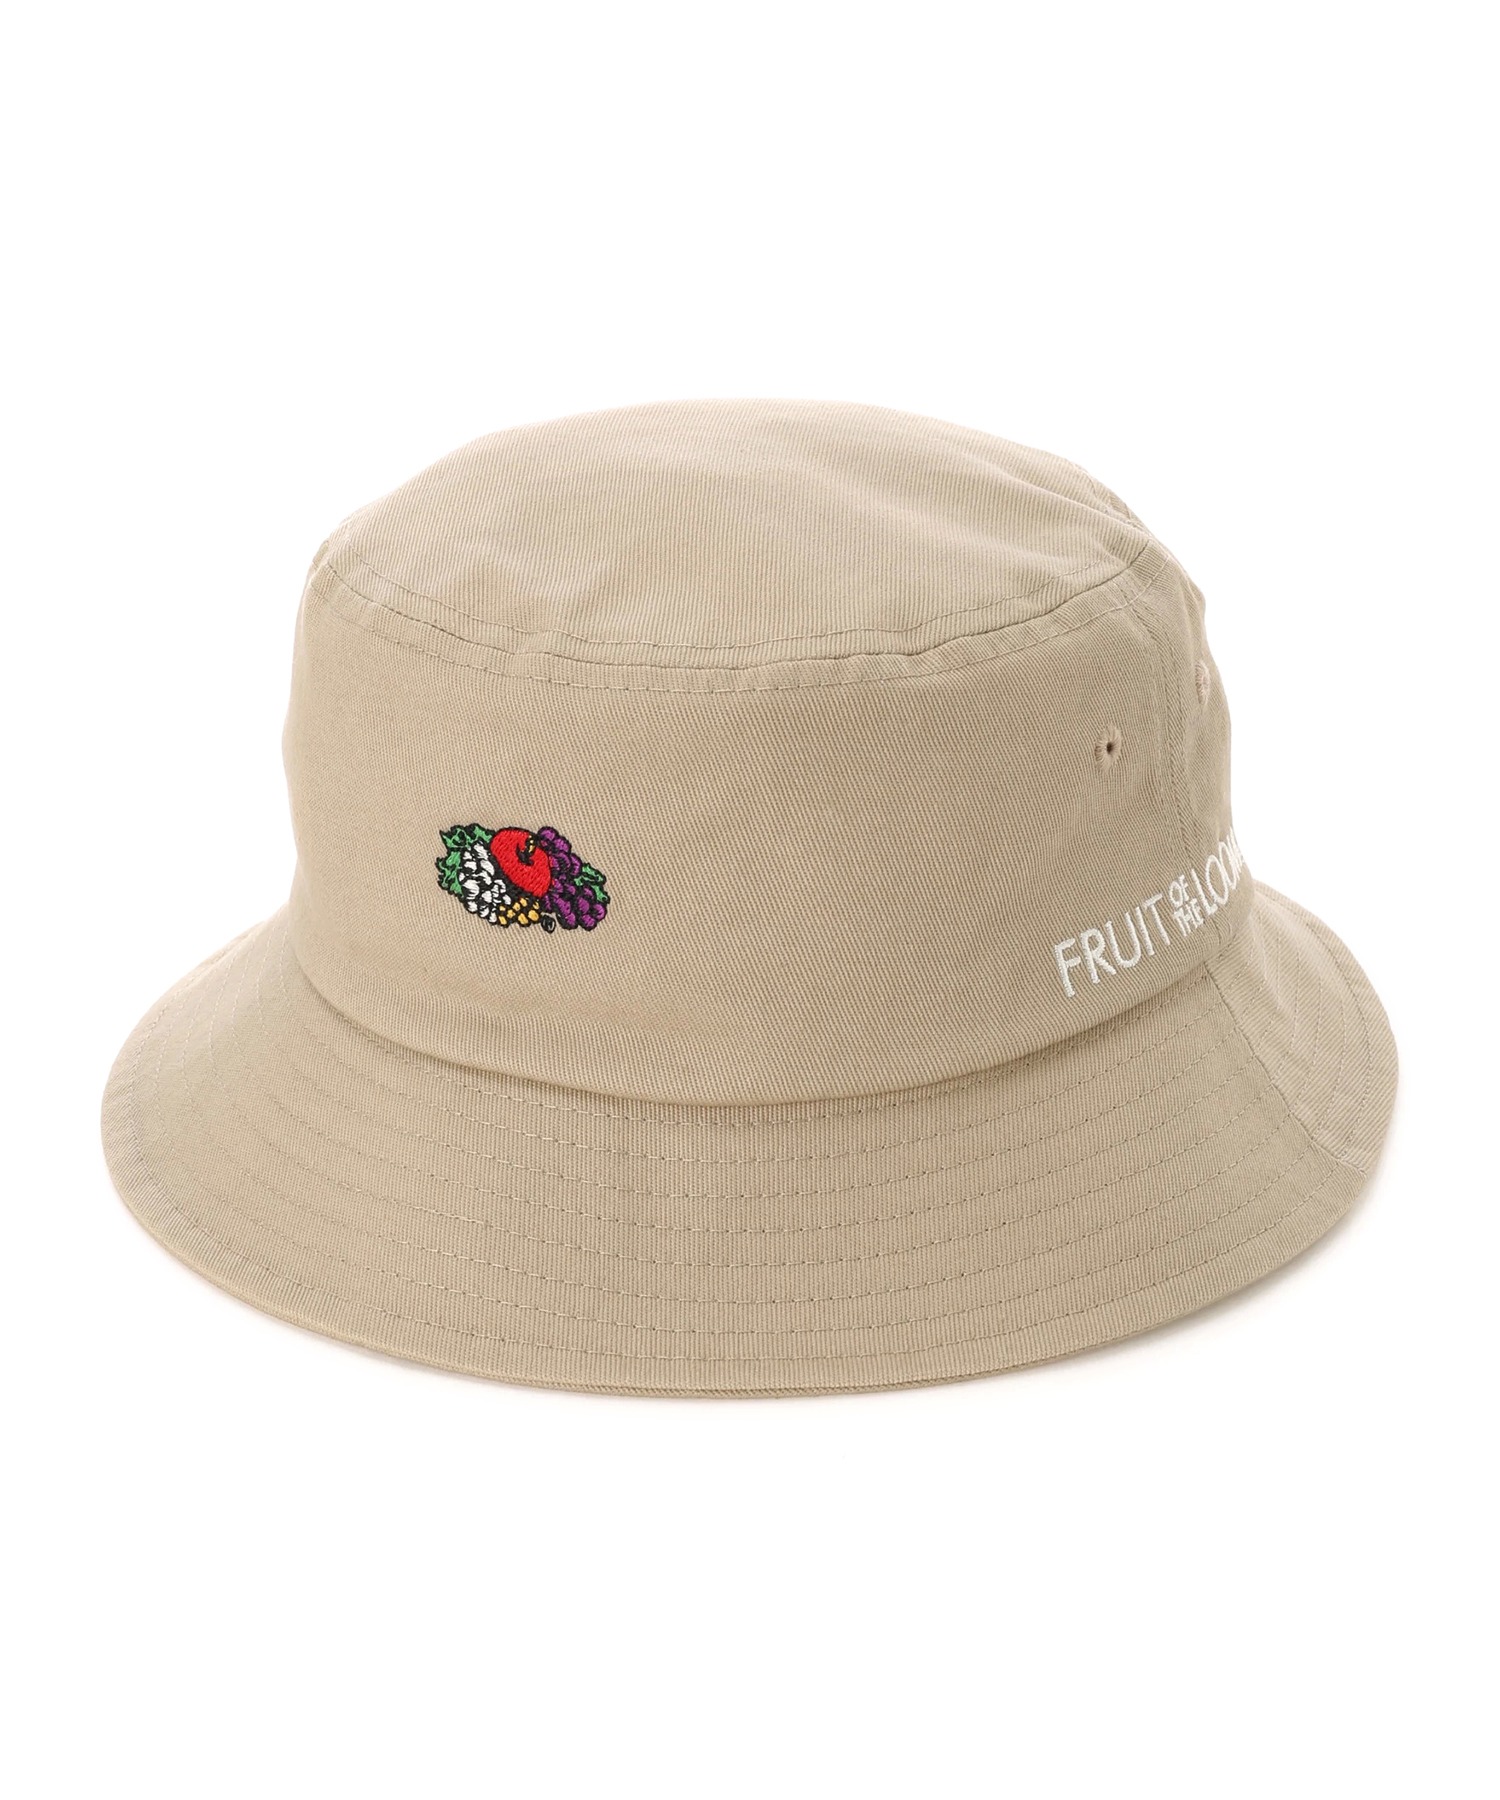 FRUIT OF THE LOOMFRUIT OF THE LOOM　LOGO EMB BUCKET HAT